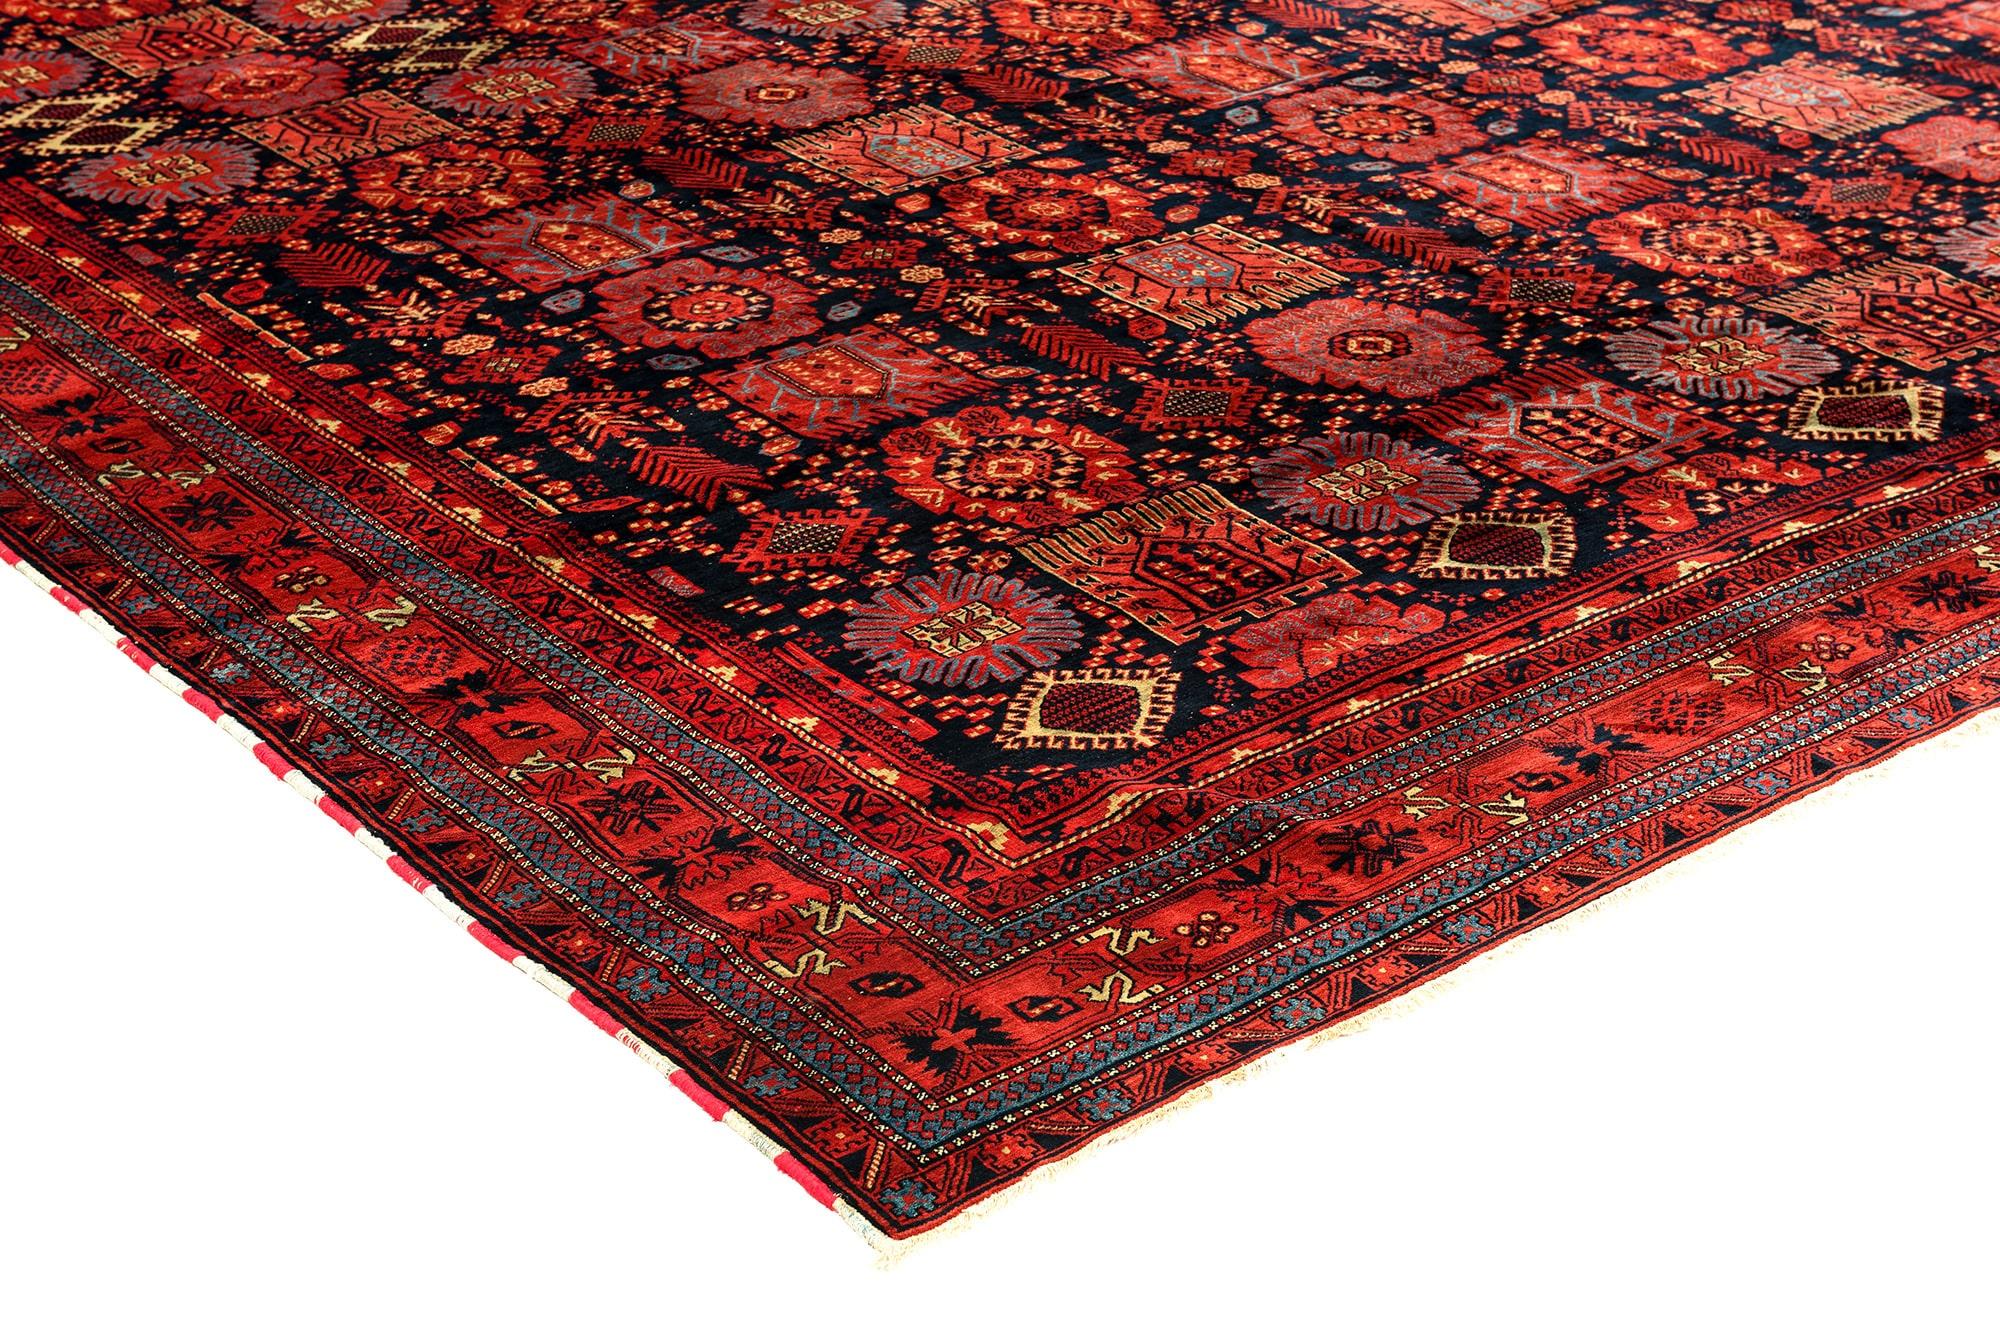 The city of Agra was not only famous for the Taj Mahal, but also for some of the most unusual and decorative carpets. This authentic antique Agra with a design heavily influenced by the Turkmen and Beluchi tribal carpets from Turkmenistan stands out